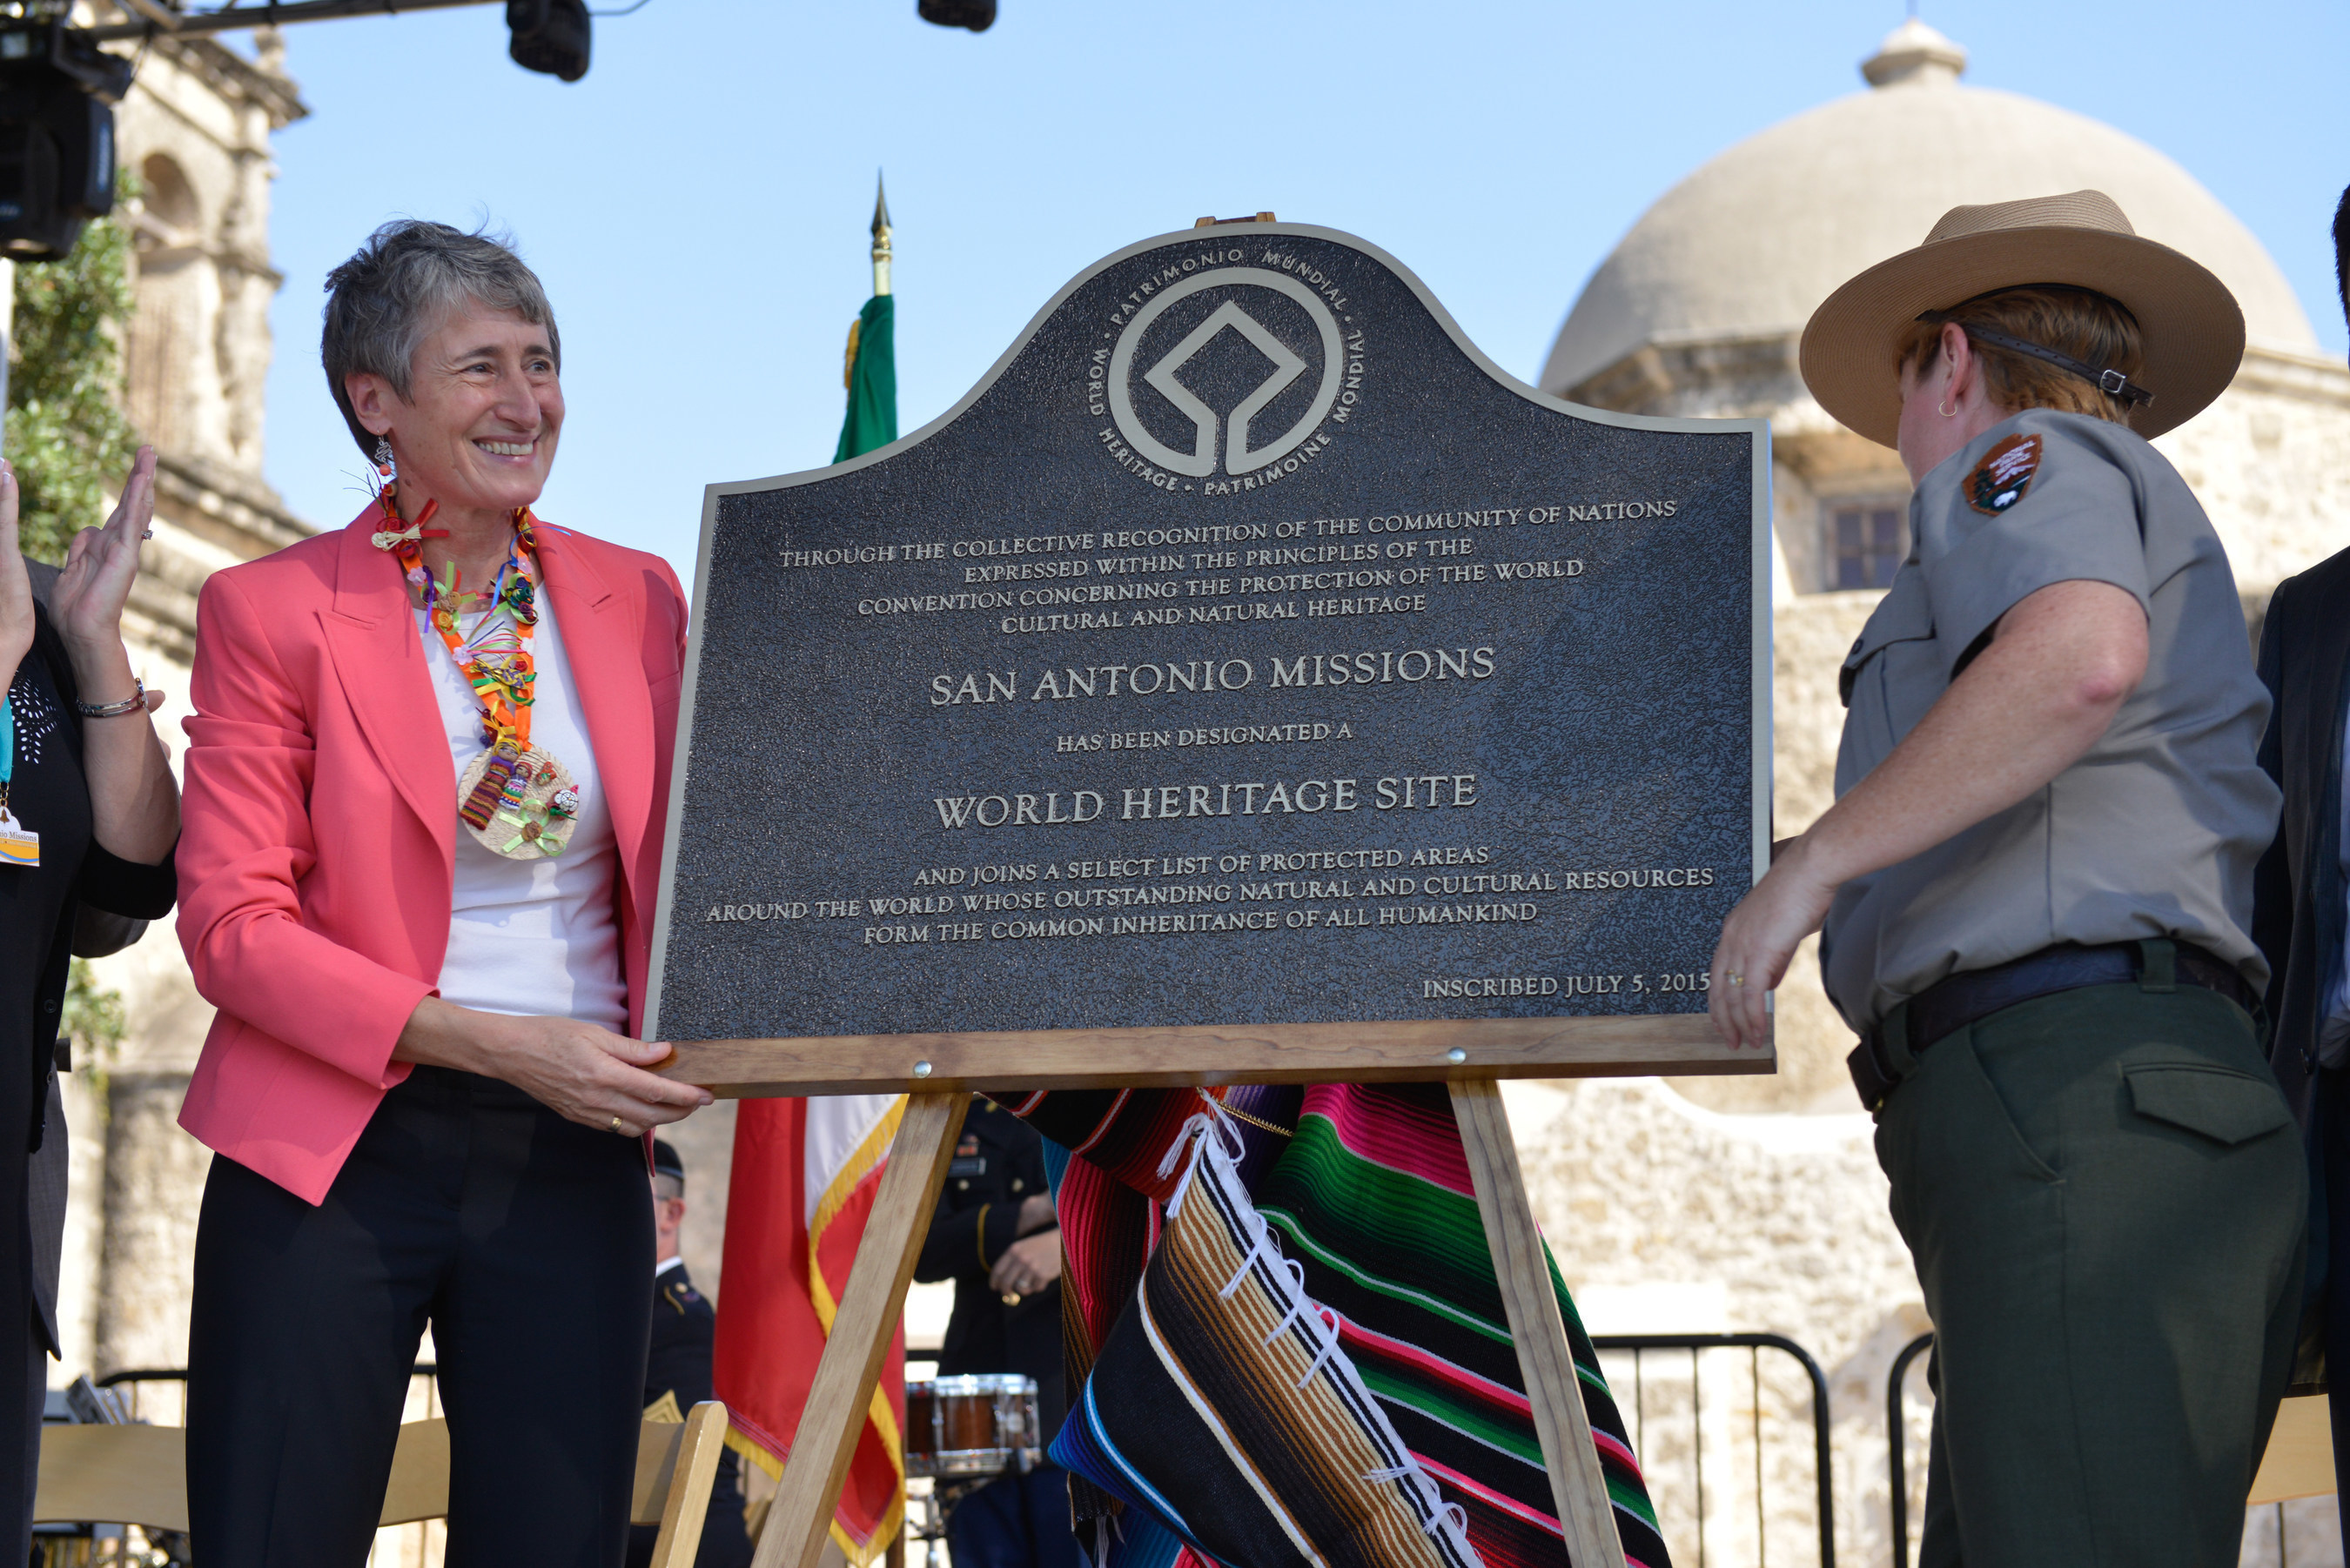 US Secretary of the Interior Sally Jewell, left, and San Antonio Missions National Park Superintendent Mardi Arce, unveil the official plaque designating San Antonio's five Spanish Colonial missions as the latest UNESCO World Heritage site in the United States, Saturday, Oct. 17, 2015, at Mission San Jose in San Antonio. The San Antonio missions join landmarks such the Statue of Liberty and the Grand Canyon as the country's 23rd UNESCO World Heritage Site, and the first in Texas. (Robin Jerstad/VisitSanAntonio.com)